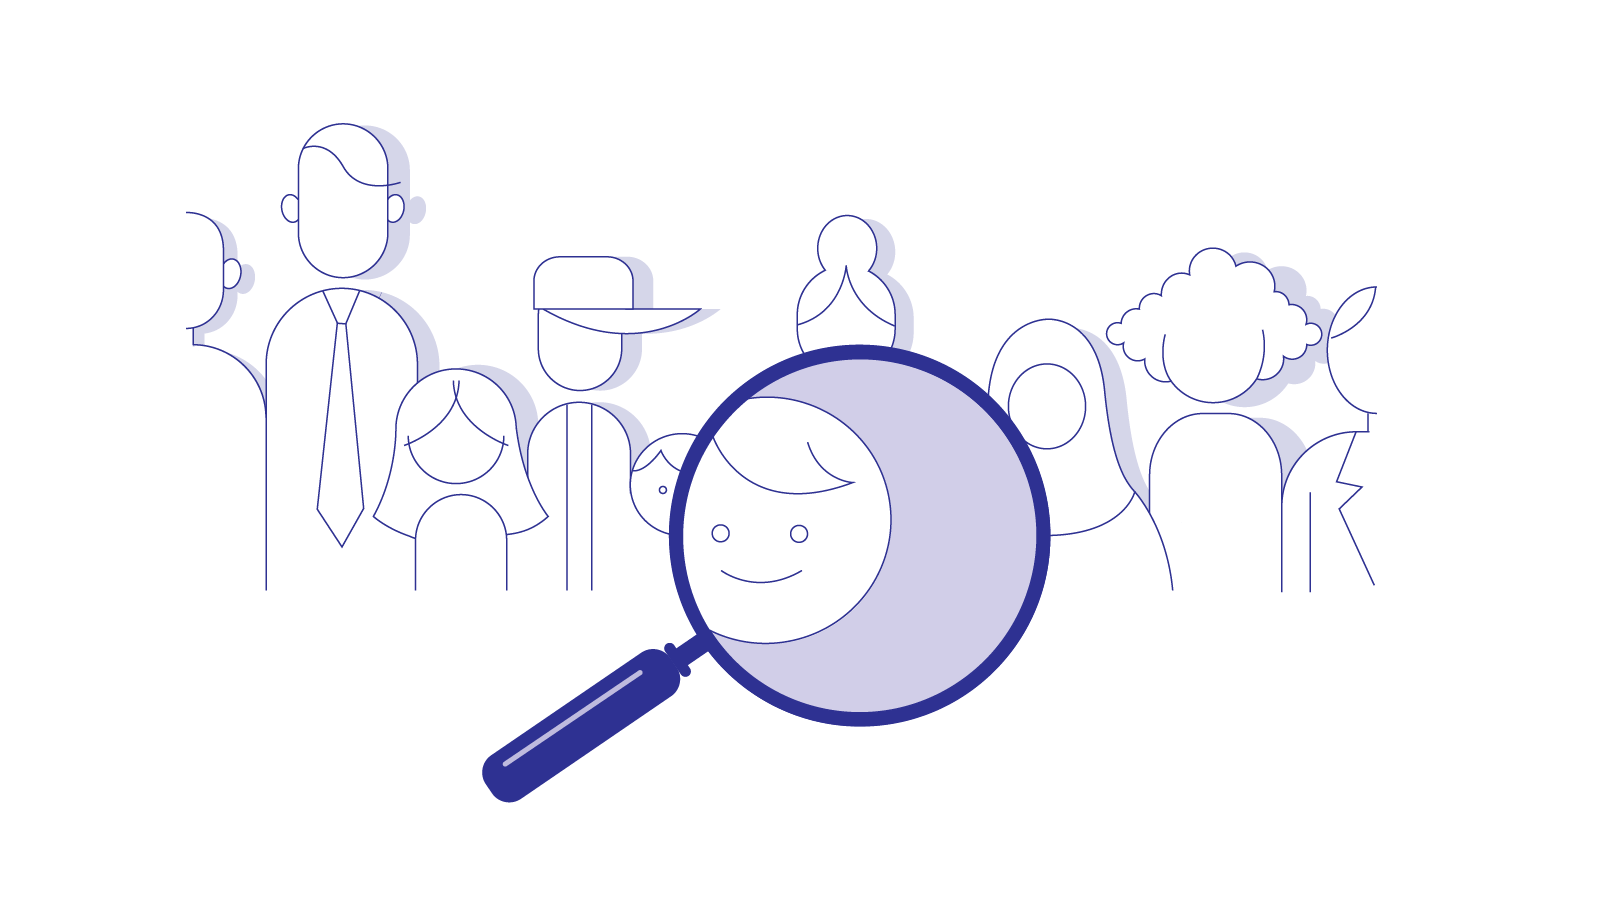 A magnifying glass reveals the face of a single individual among a crowd of many faces.